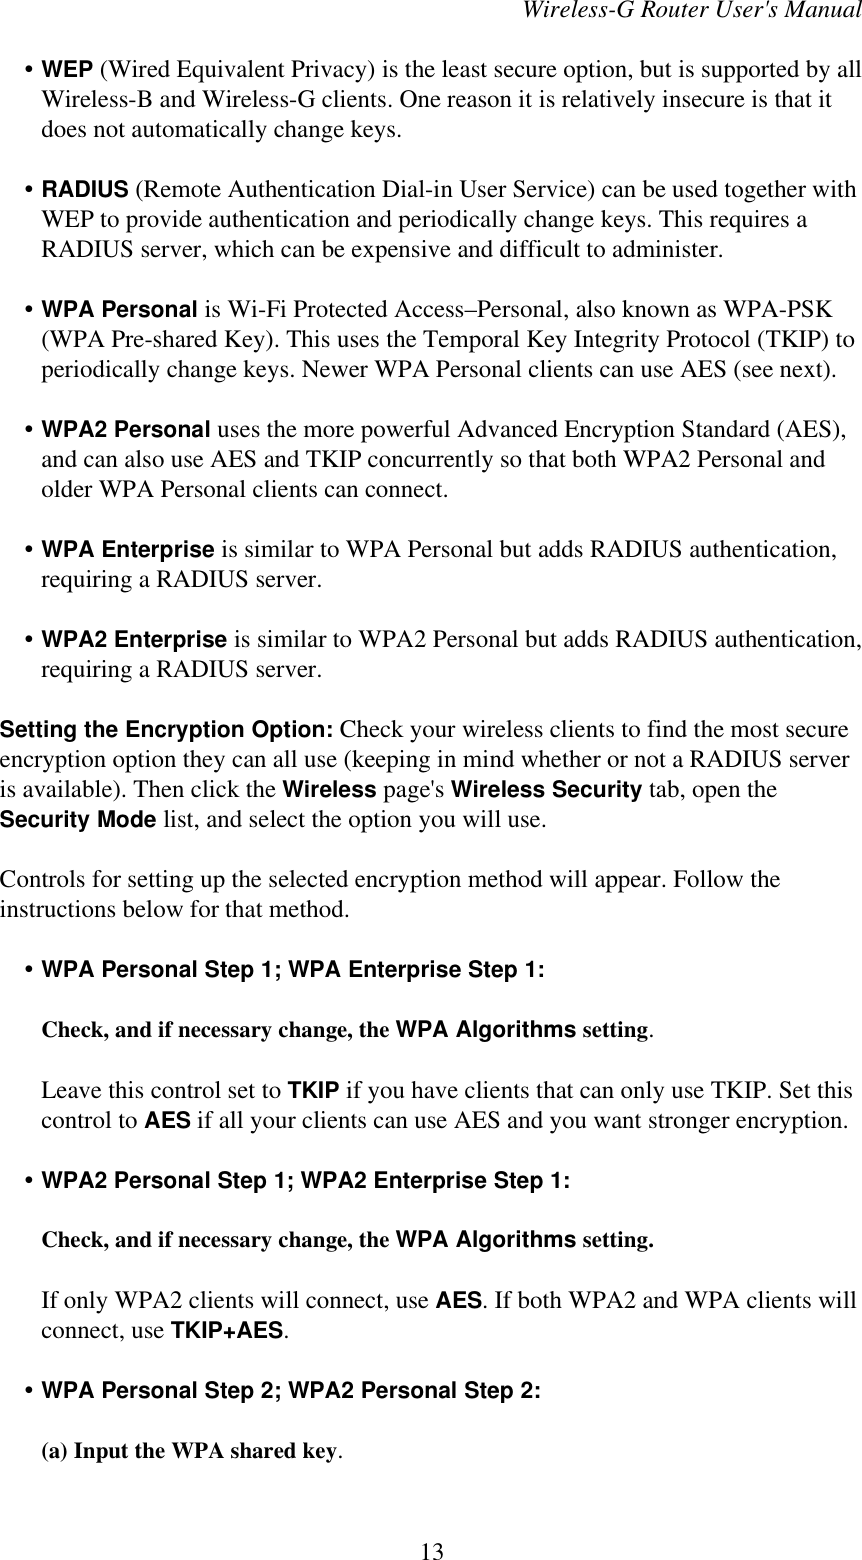 Wireless-G Router User&apos;s Manual    • WEP (Wired Equivalent Privacy) is the least secure option, but is supported by allWireless-B and Wireless-G clients. One reason it is relatively insecure is that itdoes not automatically change keys.    • RADIUS (Remote Authentication Dial-in User Service) can be used together withWEP to provide authentication and periodically change keys. This requires aRADIUS server, which can be expensive and difficult to administer.    • WPA Personal is Wi-Fi Protected Access–Personal, also known as WPA-PSK(WPA Pre-shared Key). This uses the Temporal Key Integrity Protocol (TKIP) toperiodically change keys. Newer WPA Personal clients can use AES (see next).    • WPA2 Personal uses the more powerful Advanced Encryption Standard (AES),and can also use AES and TKIP concurrently so that both WPA2 Personal andolder WPA Personal clients can connect.    • WPA Enterprise is similar to WPA Personal but adds RADIUS authentication,requiring a RADIUS server.    • WPA2 Enterprise is similar to WPA2 Personal but adds RADIUS authentication,requiring a RADIUS server.Setting the Encryption Option: Check your wireless clients to find the most secureencryption option they can all use (keeping in mind whether or not a RADIUS serveris available). Then click the Wireless page&apos;s Wireless Security tab, open theSecurity Mode list, and select the option you will use.Controls for setting up the selected encryption method will appear. Follow theinstructions below for that method.    • WPA Personal Step 1; WPA Enterprise Step 1: Check, and if necessary change, the WPA Algorithms setting.Leave this control set to TKIP if you have clients that can only use TKIP. Set thiscontrol to AES if all your clients can use AES and you want stronger encryption.    • WPA2 Personal Step 1; WPA2 Enterprise Step 1: Check, and if necessary change, the WPA Algorithms setting.If only WPA2 clients will connect, use AES. If both WPA2 and WPA clients willconnect, use TKIP+AES.    • WPA Personal Step 2; WPA2 Personal Step 2:(a) Input the WPA shared key.13